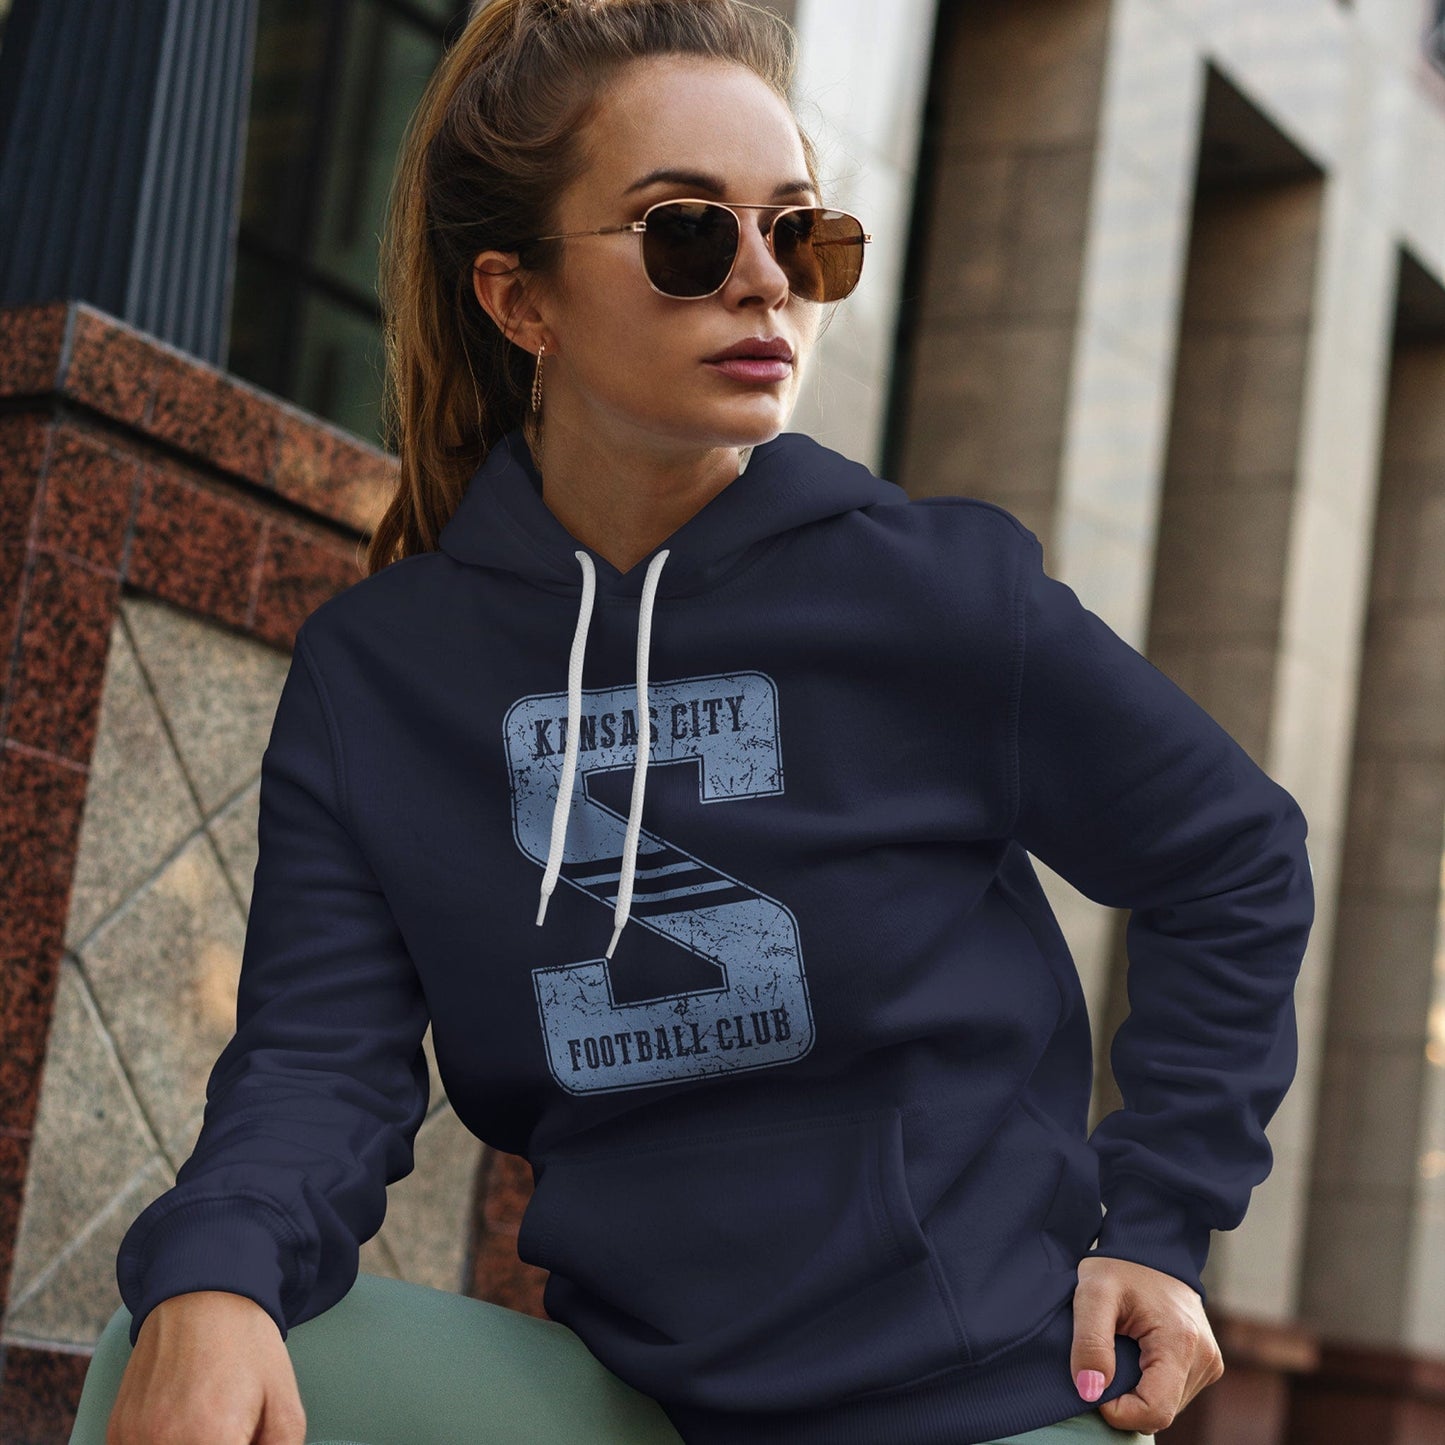 KC Swag Sporting Kansas City powder blue KANSAS CITY FOOTBALL CLUB in STRIPED S on navy fleece pull-over hoodie worn by female model sitting in front of stone building